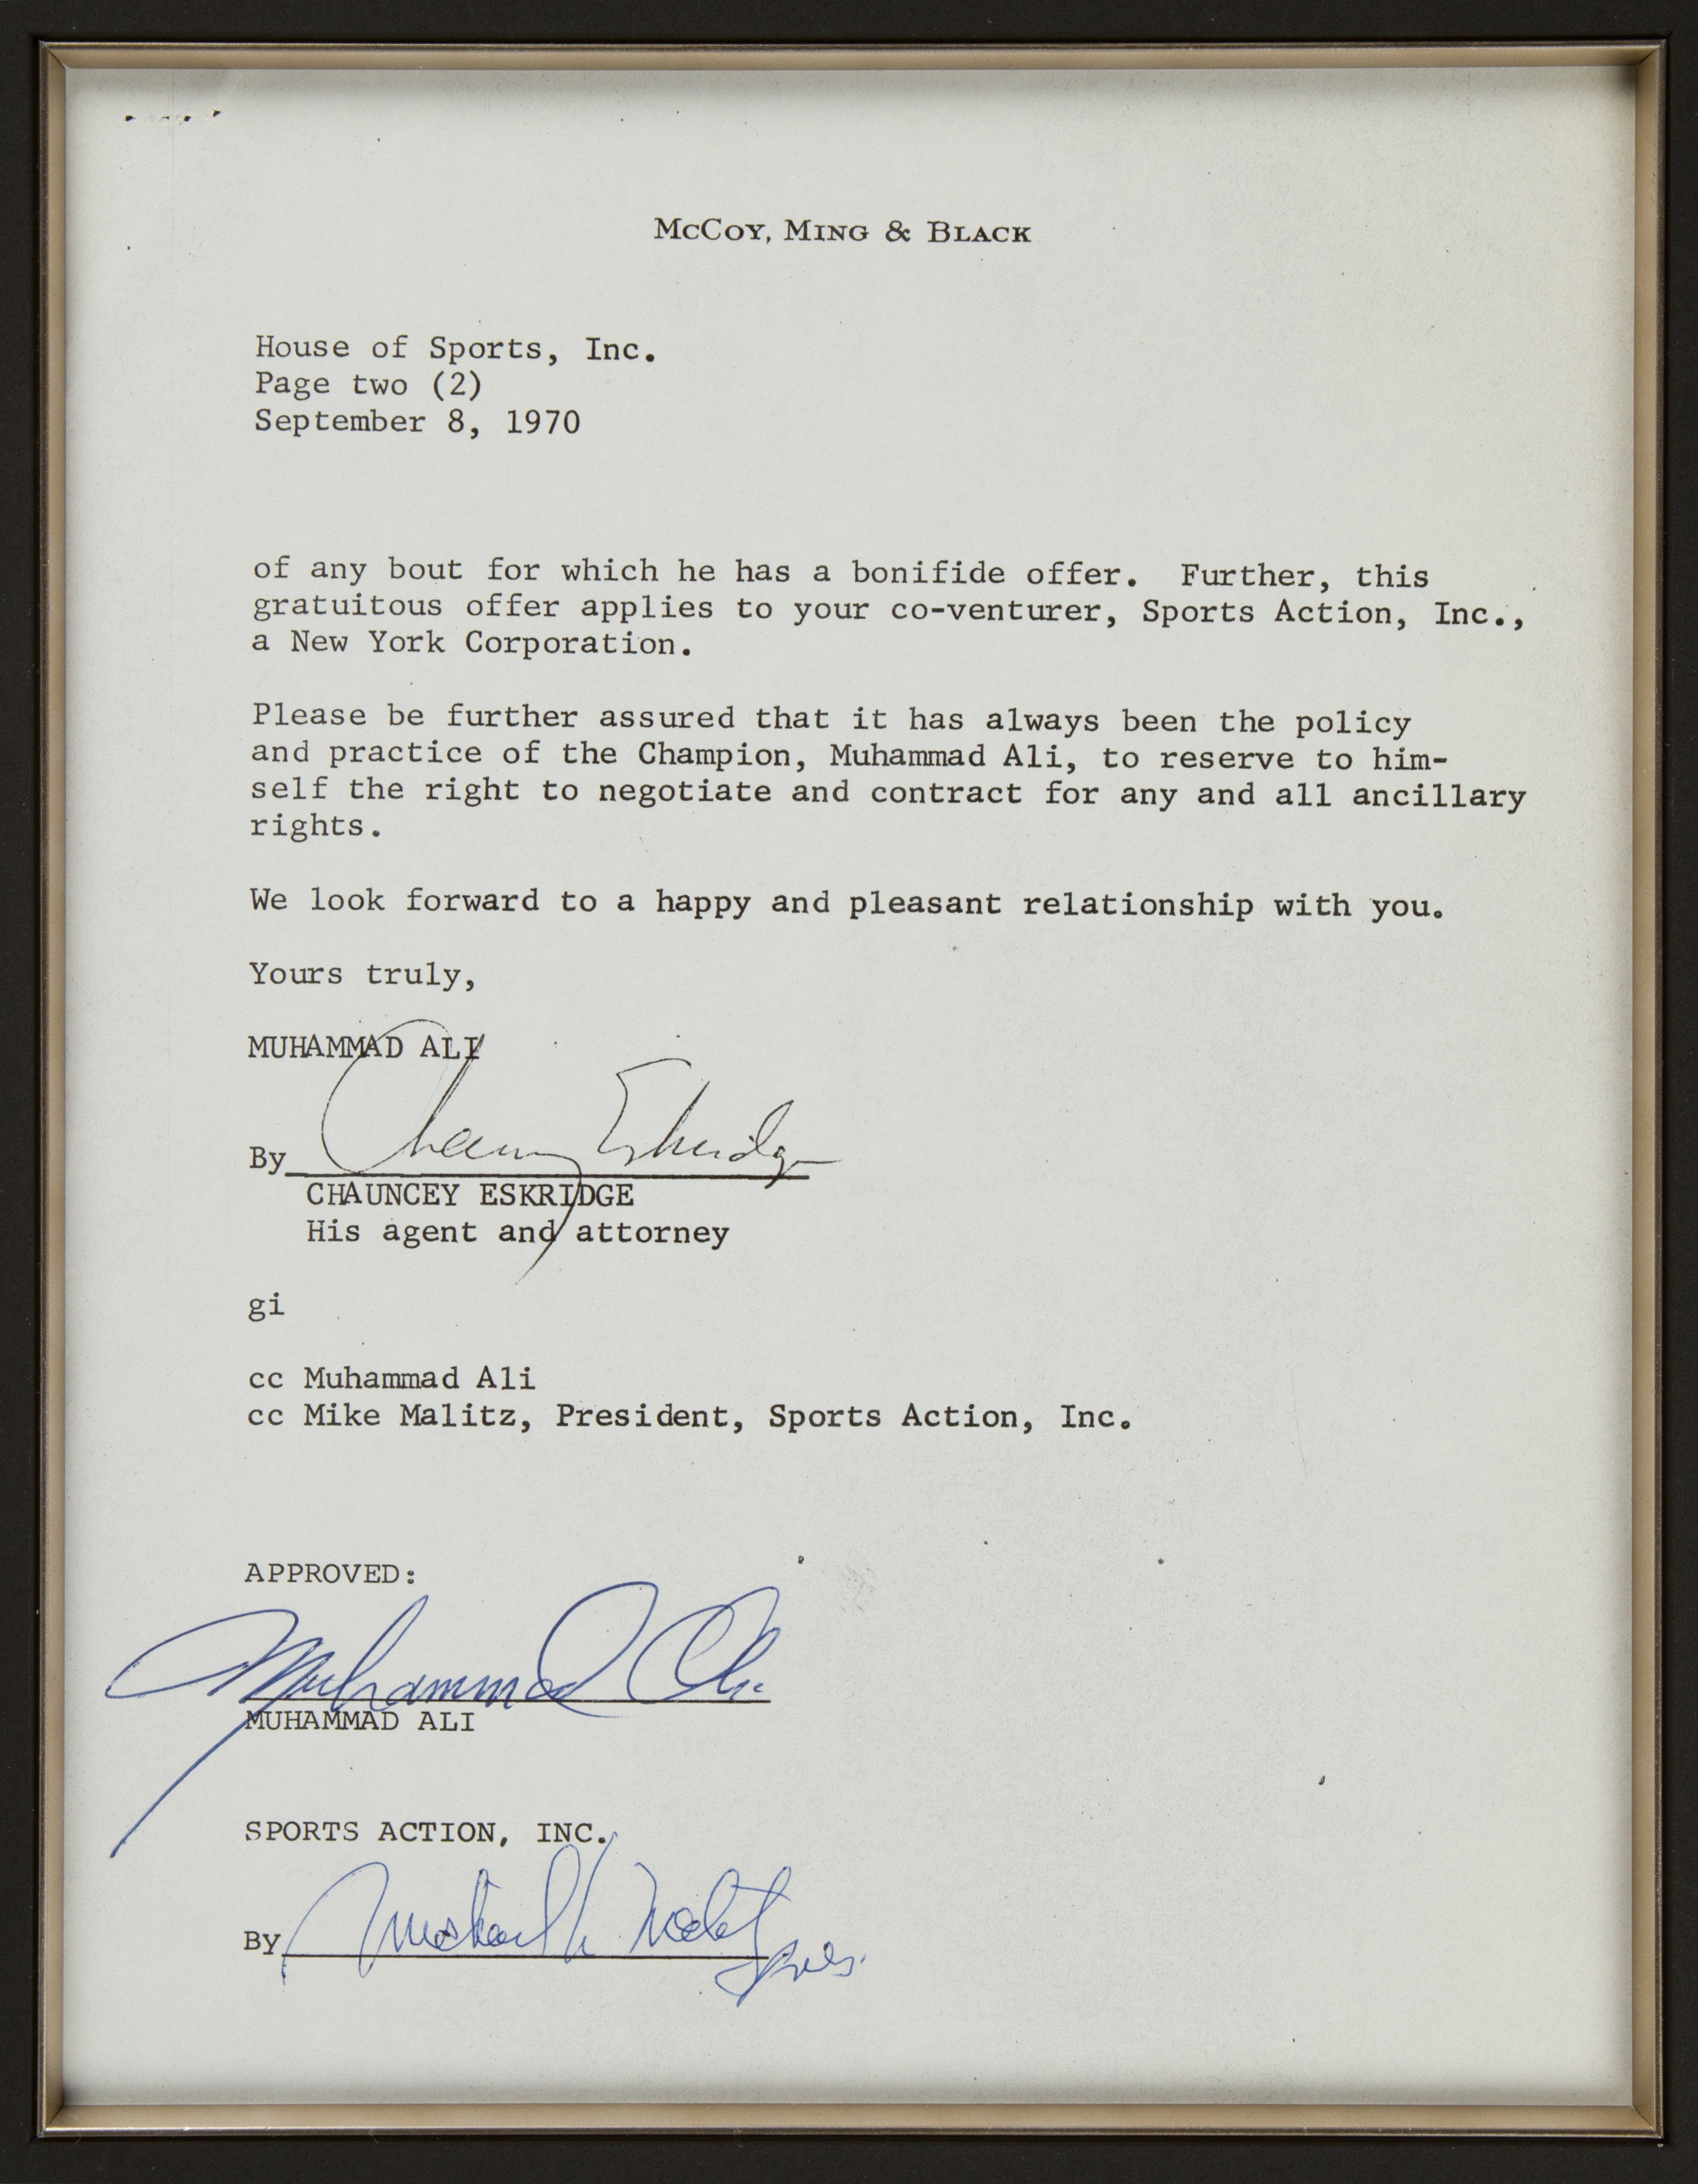 Rare Muhammad Ali Signed 1970 Fight Contract: "It is proposed that Muhammad Ali will meet Jerry Quarry in a boxing match at Atlanta on October 26, 1970.“